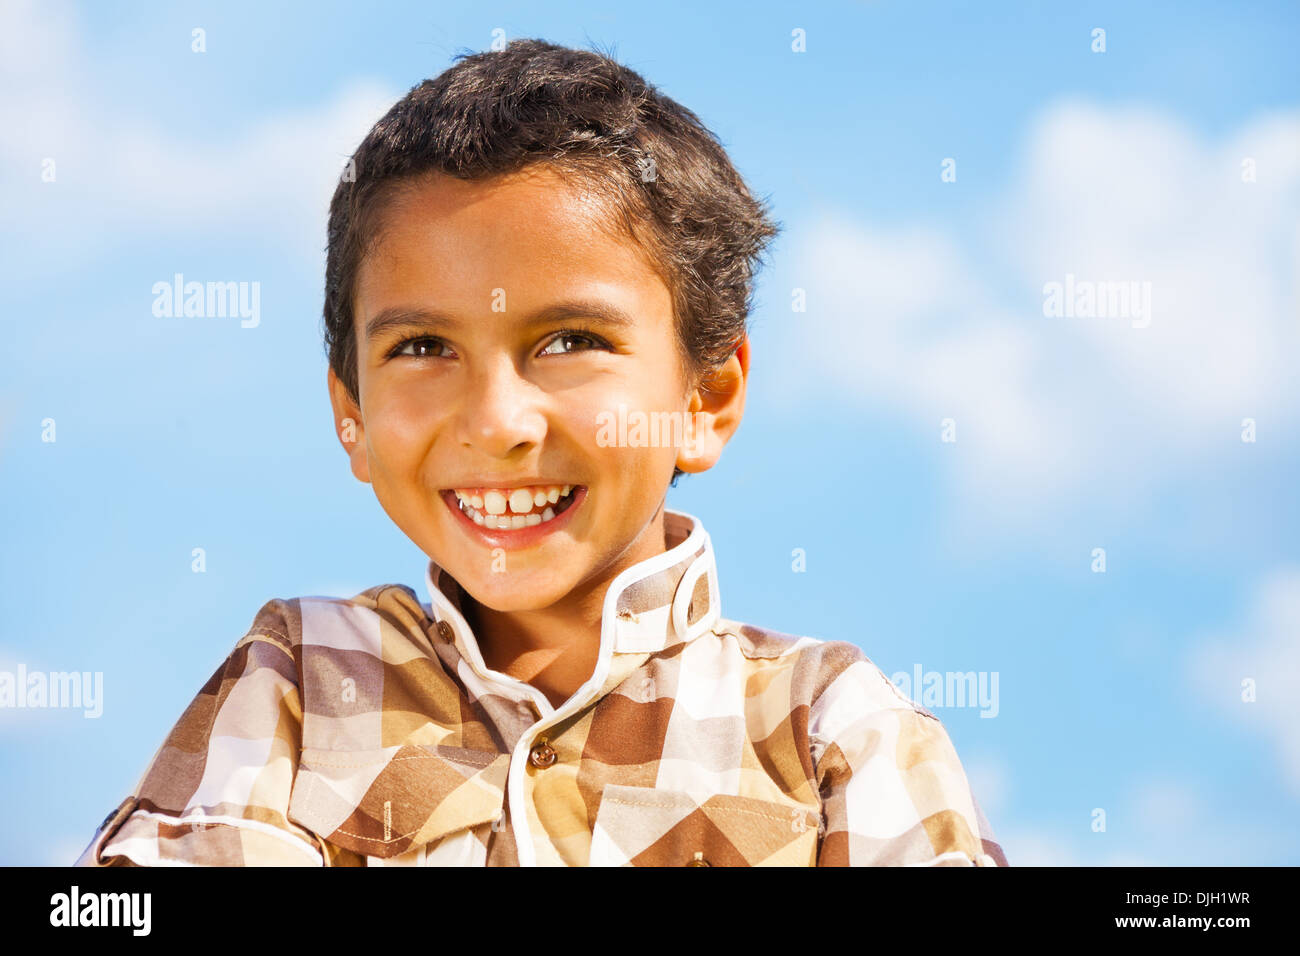 Laughing dark little 6 years old boy with short hair over blue sky Stock Photo